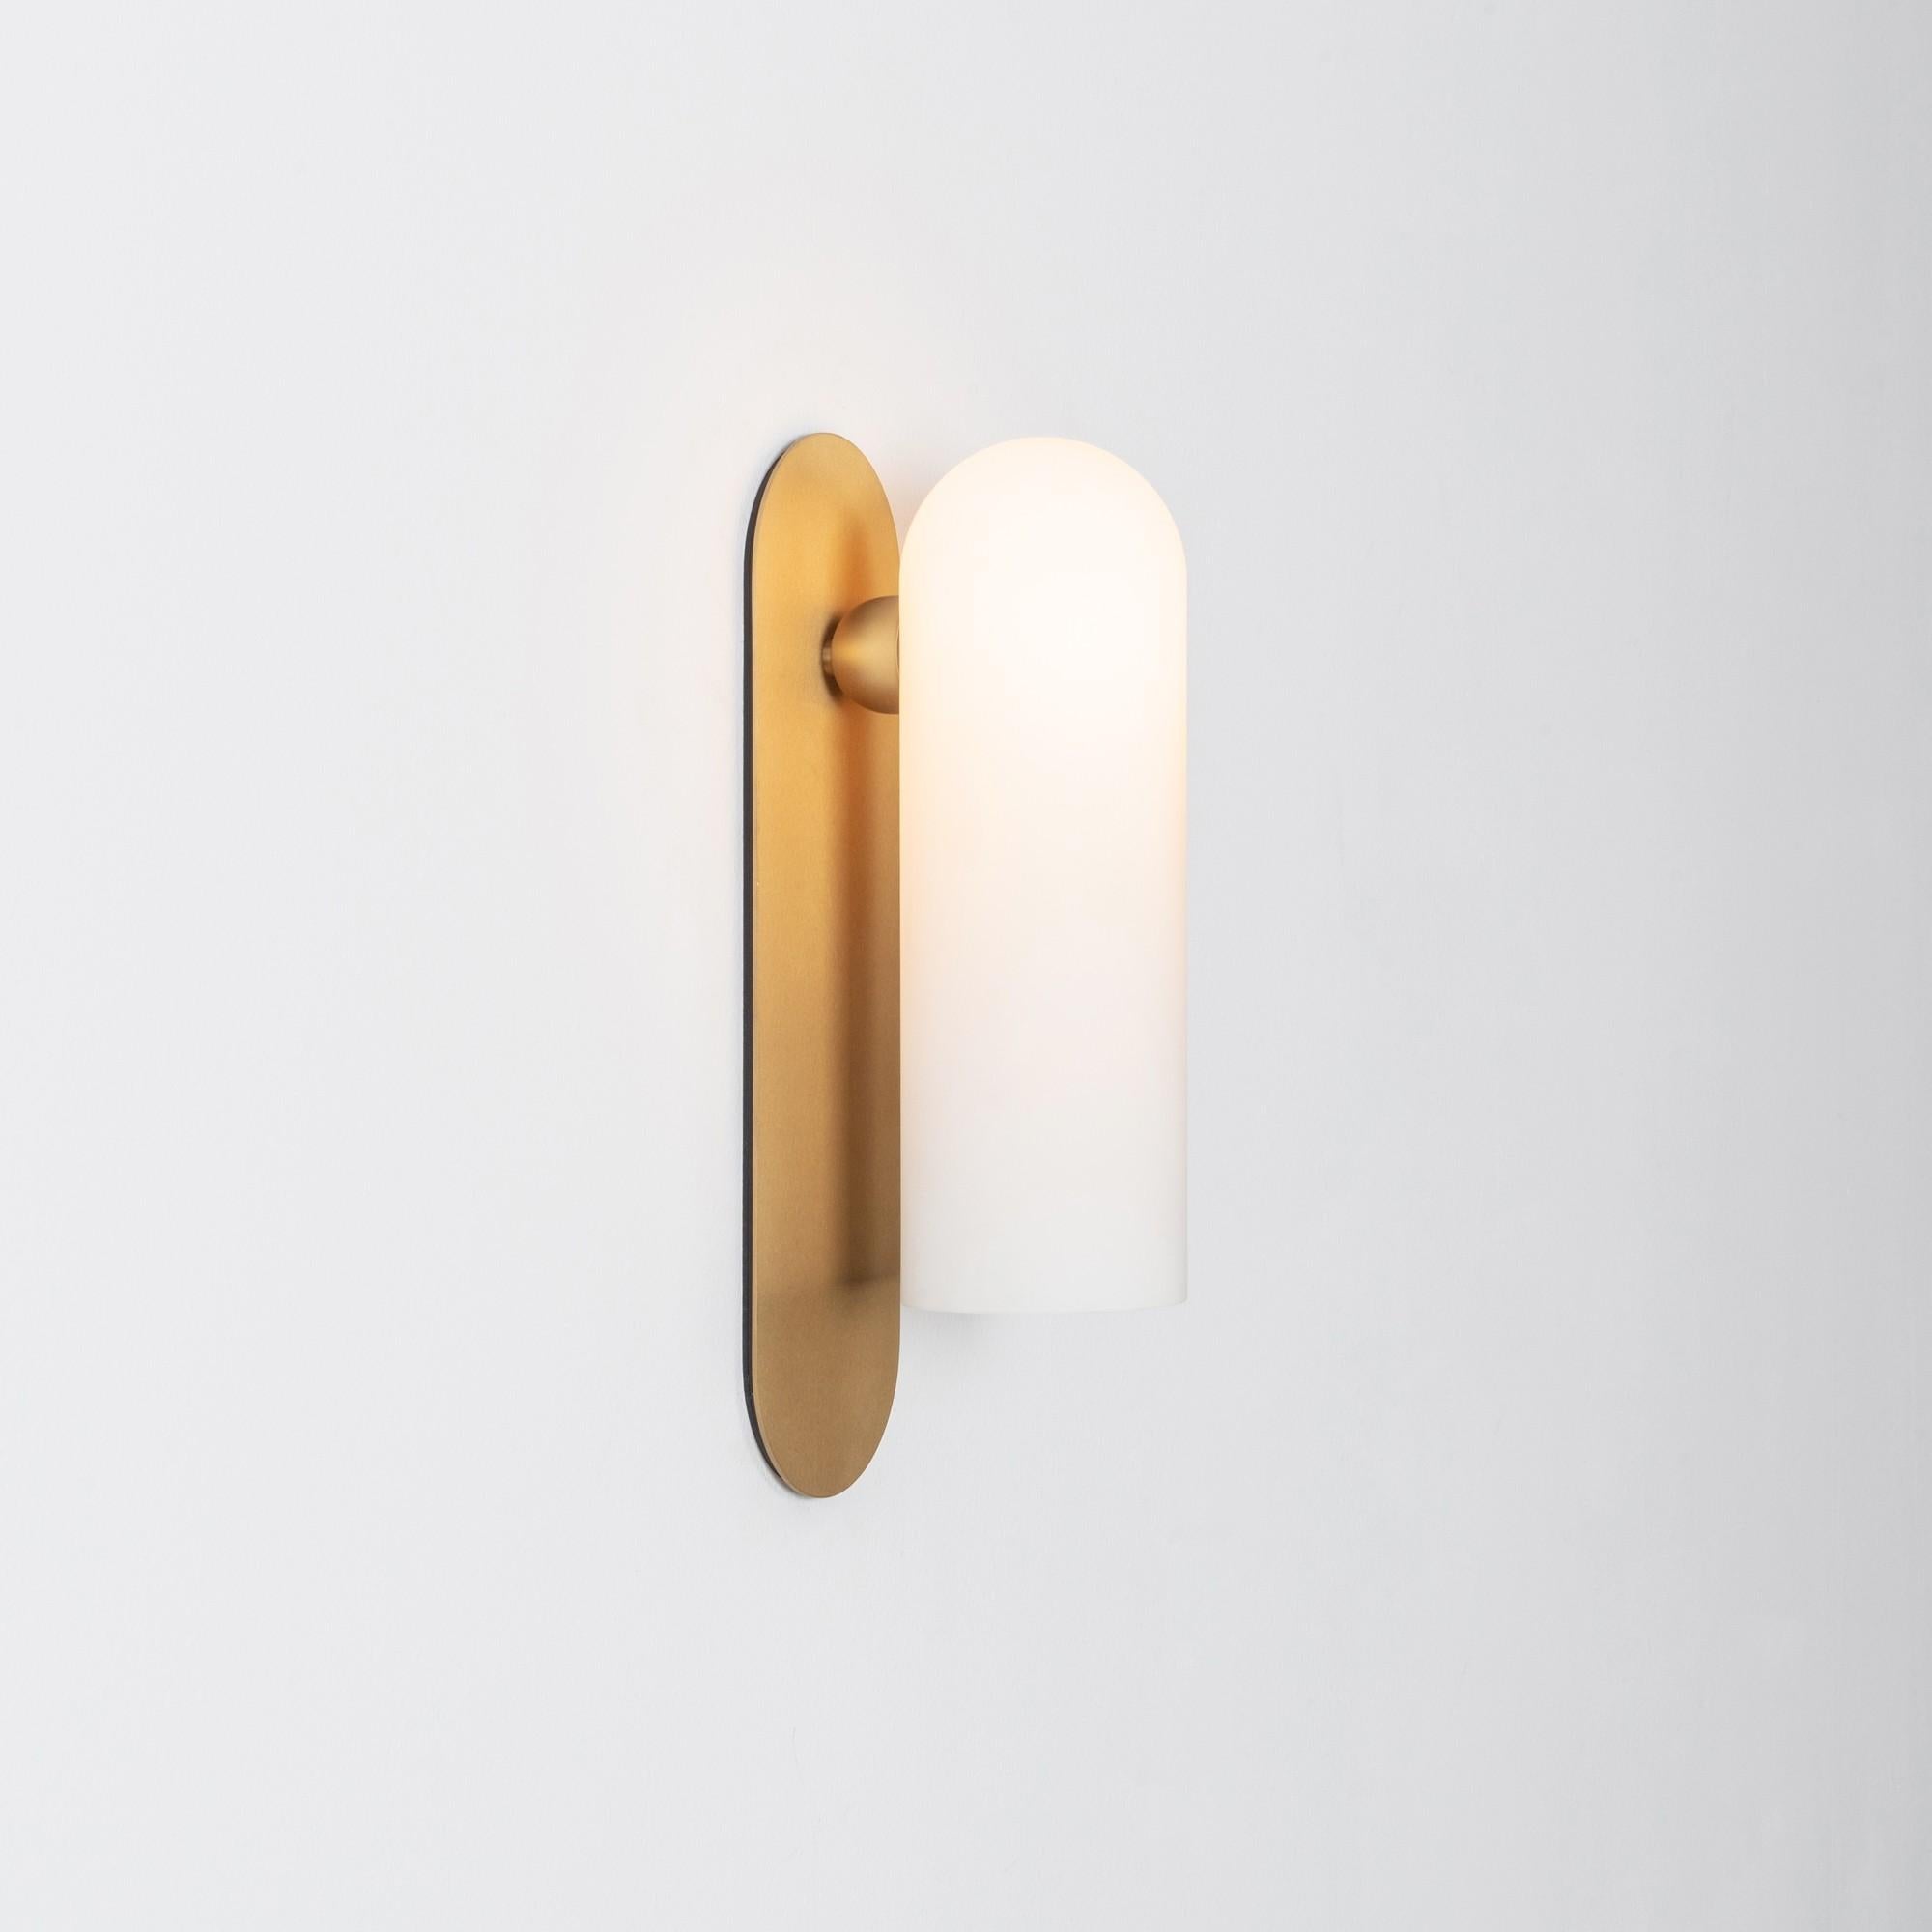 Odyssey LG Brass Wall Sconce by Schwung
Dimensions: W 10.5 x D 14 x H 38 cm
Materials: Brass, frosted glass

Finishes available: Black gunmetal, polished nickel, brass

Schwung is a German word, and loosely defined, means energy or momentumm of a